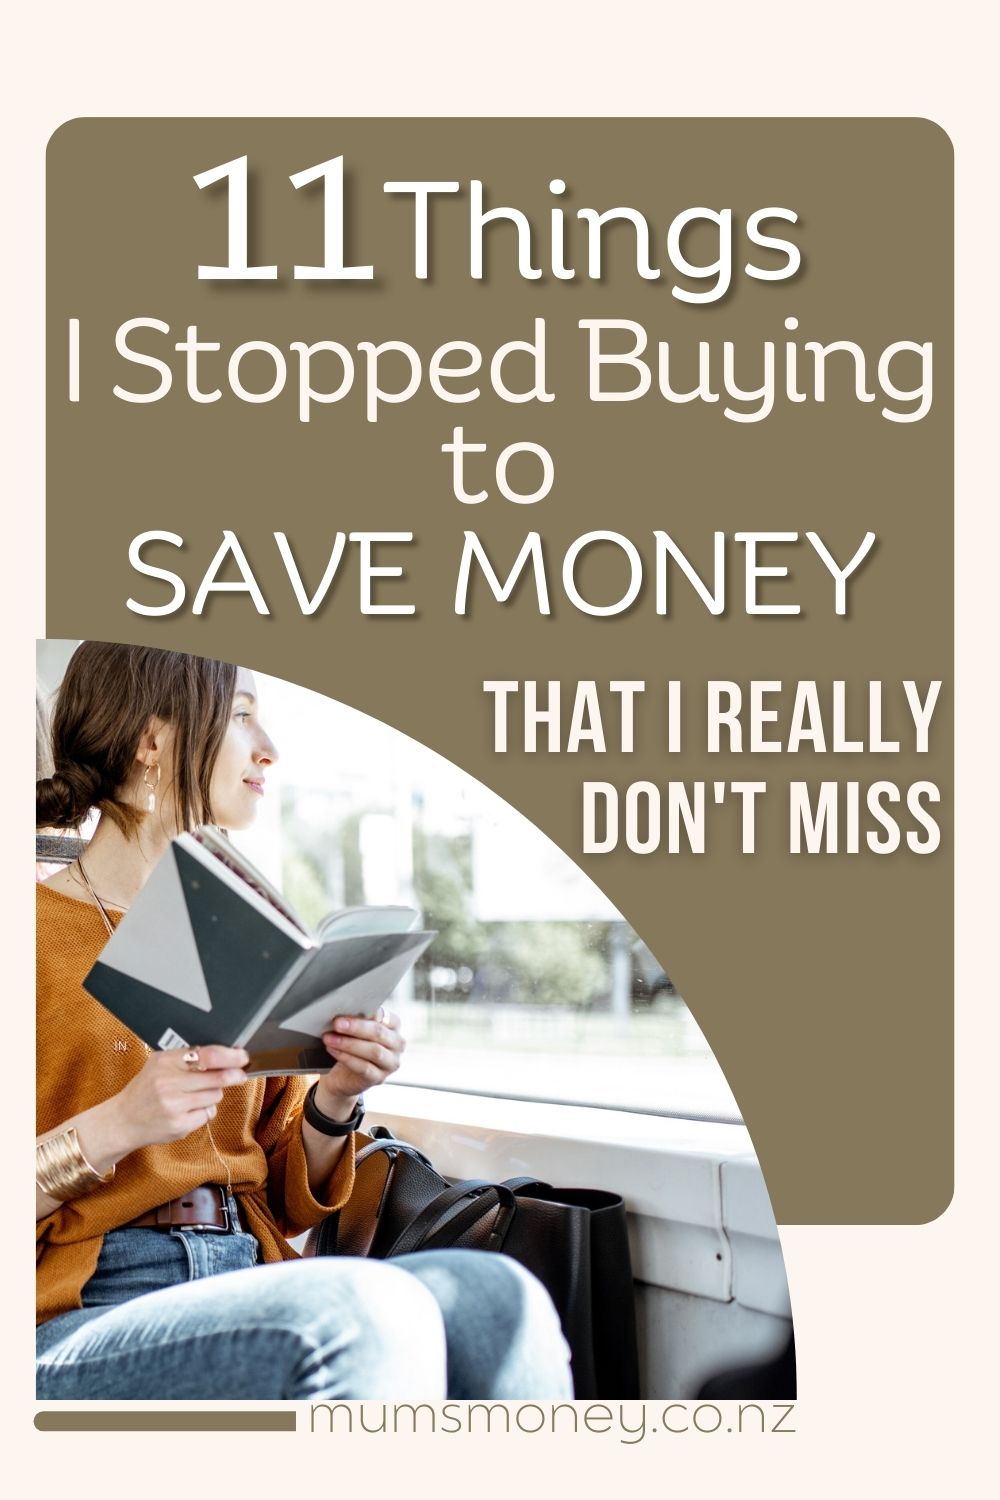 Things I Stopped Buying to Save Money